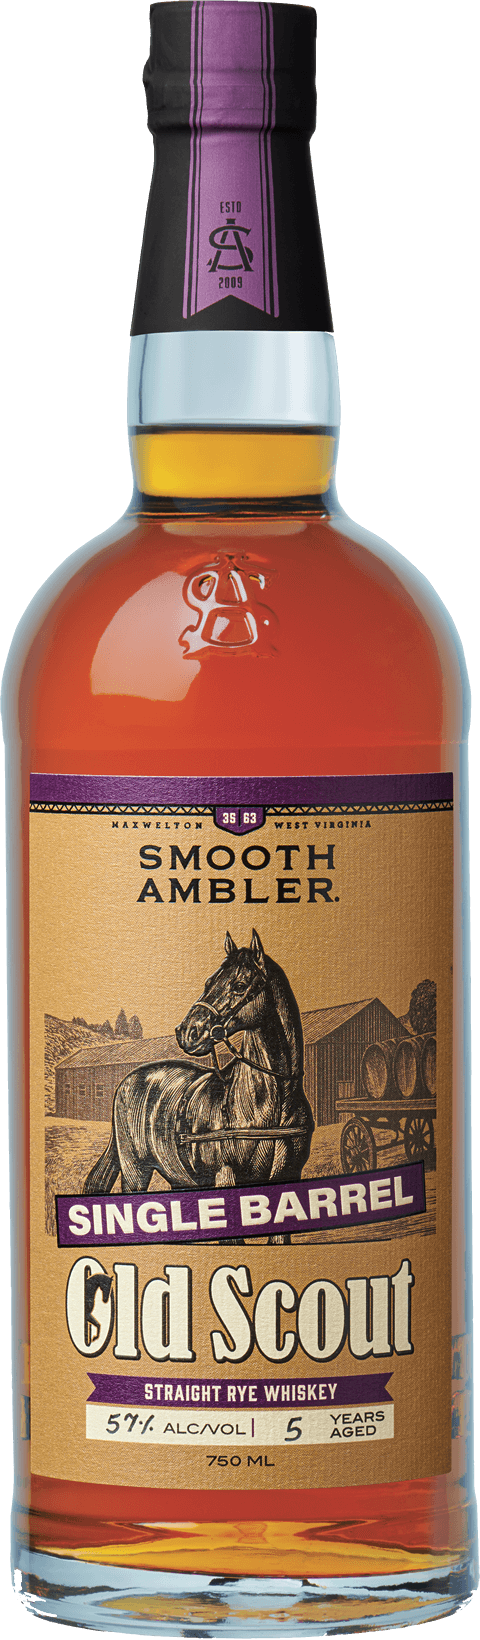 Smooth Ambler Old Scout Single Barrel Straight Rye Whiskey Bottle